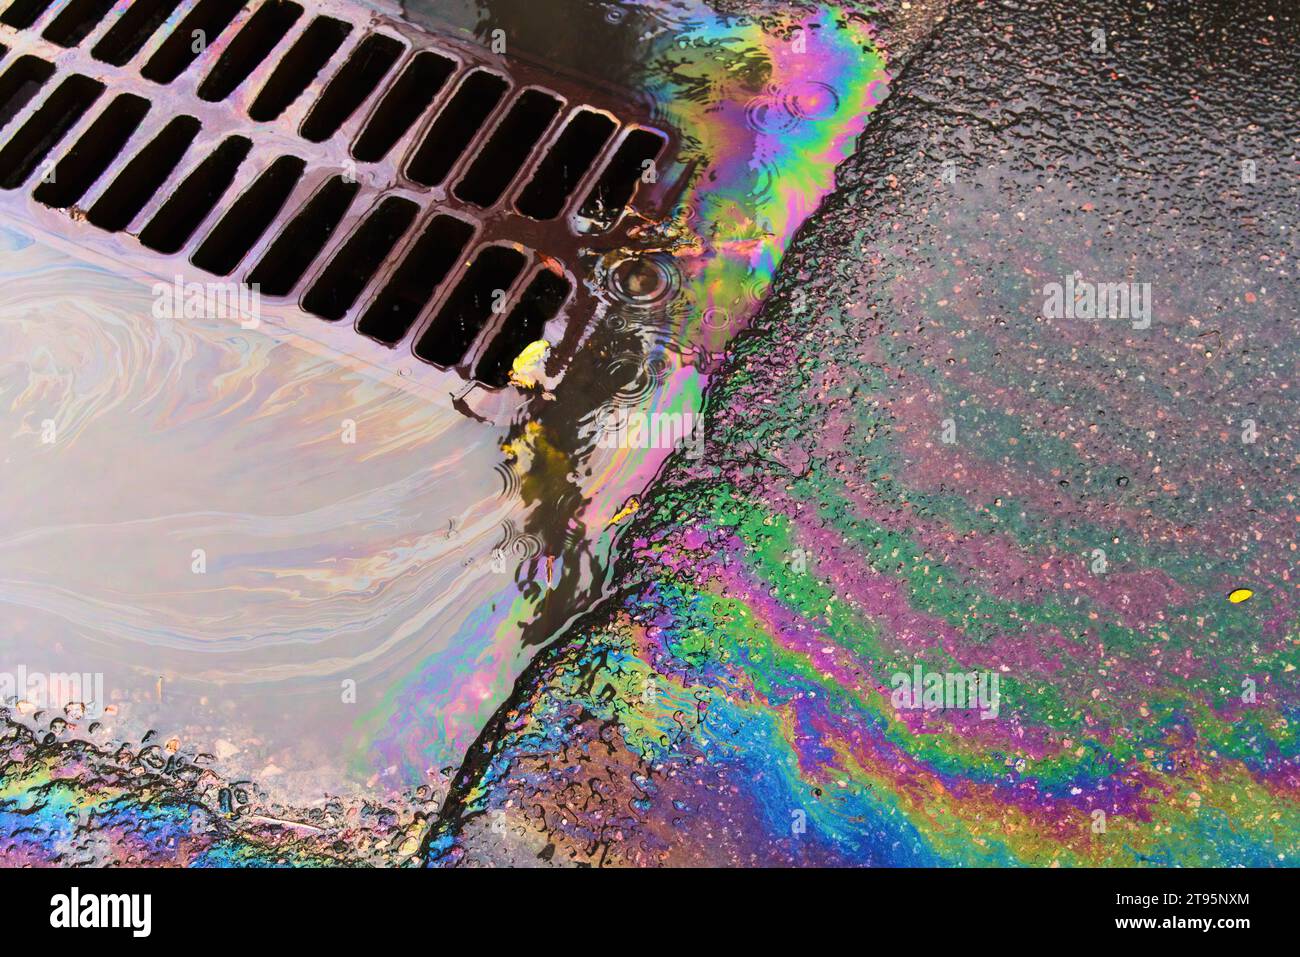 An oil slick against the backdrop of an asphalt road flows into a storm drain through a grate. Stock Photo